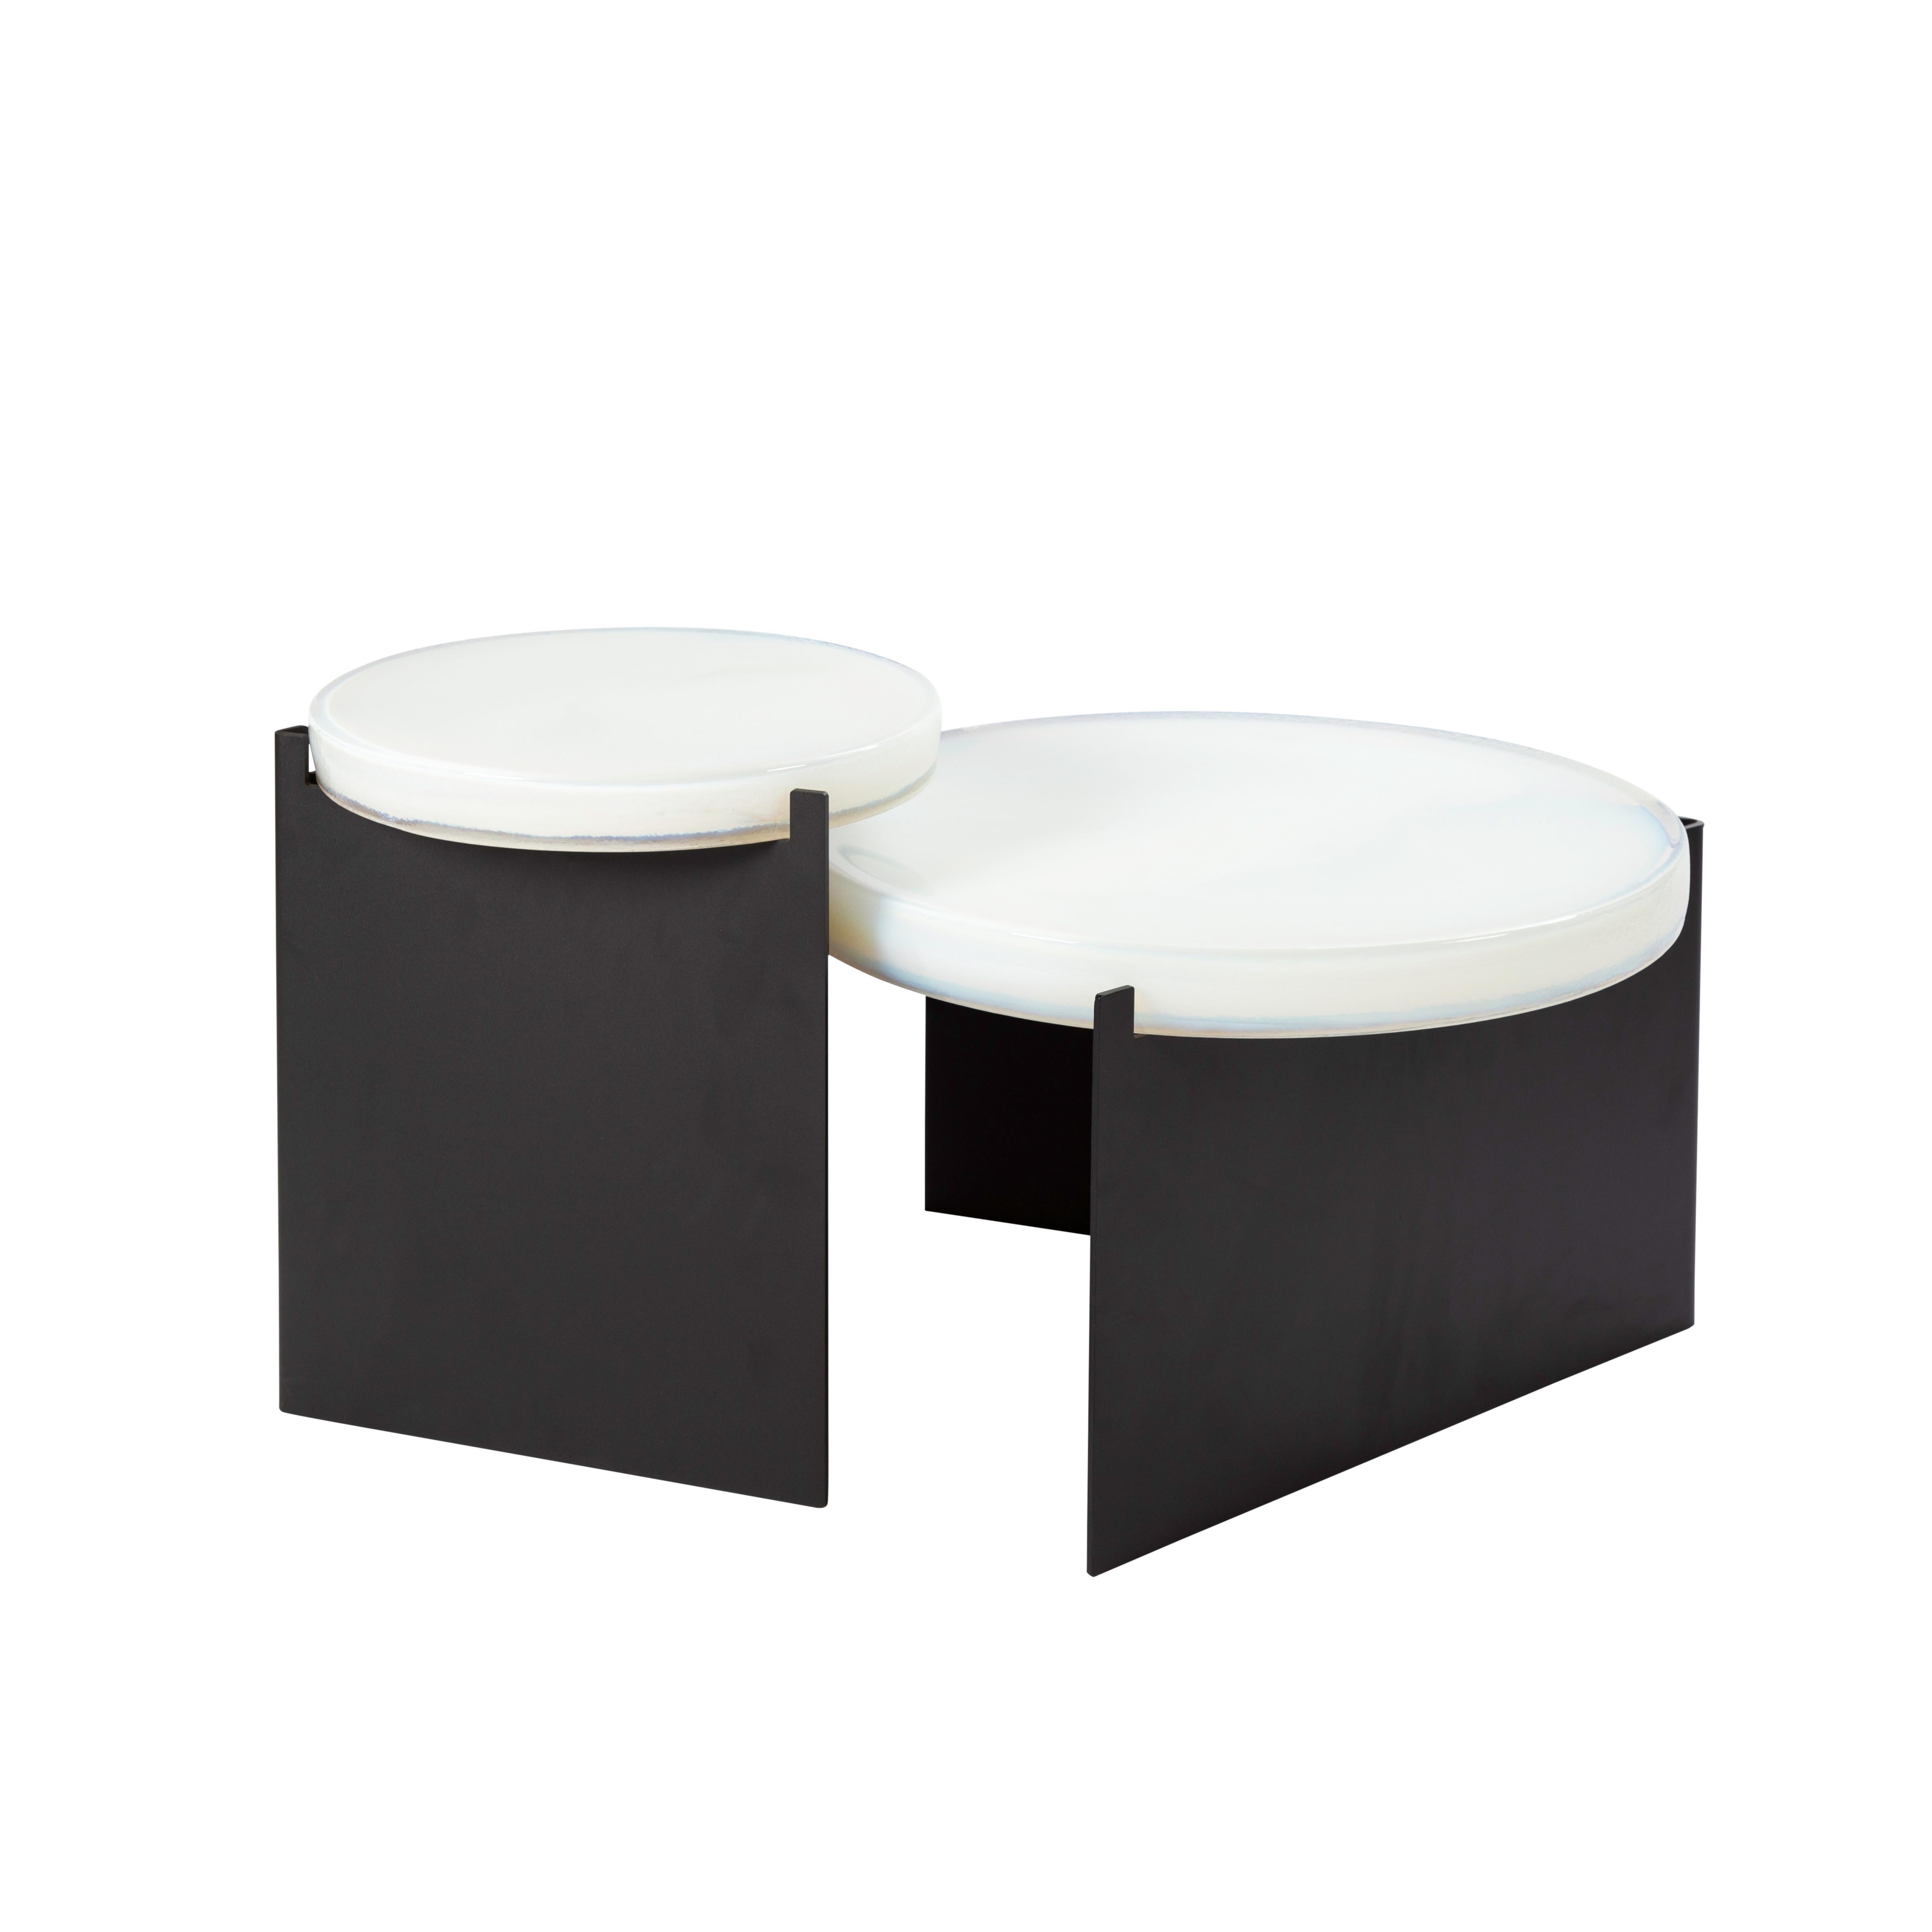 German Alwa One Big White Black Coffee Table by Pulpo For Sale